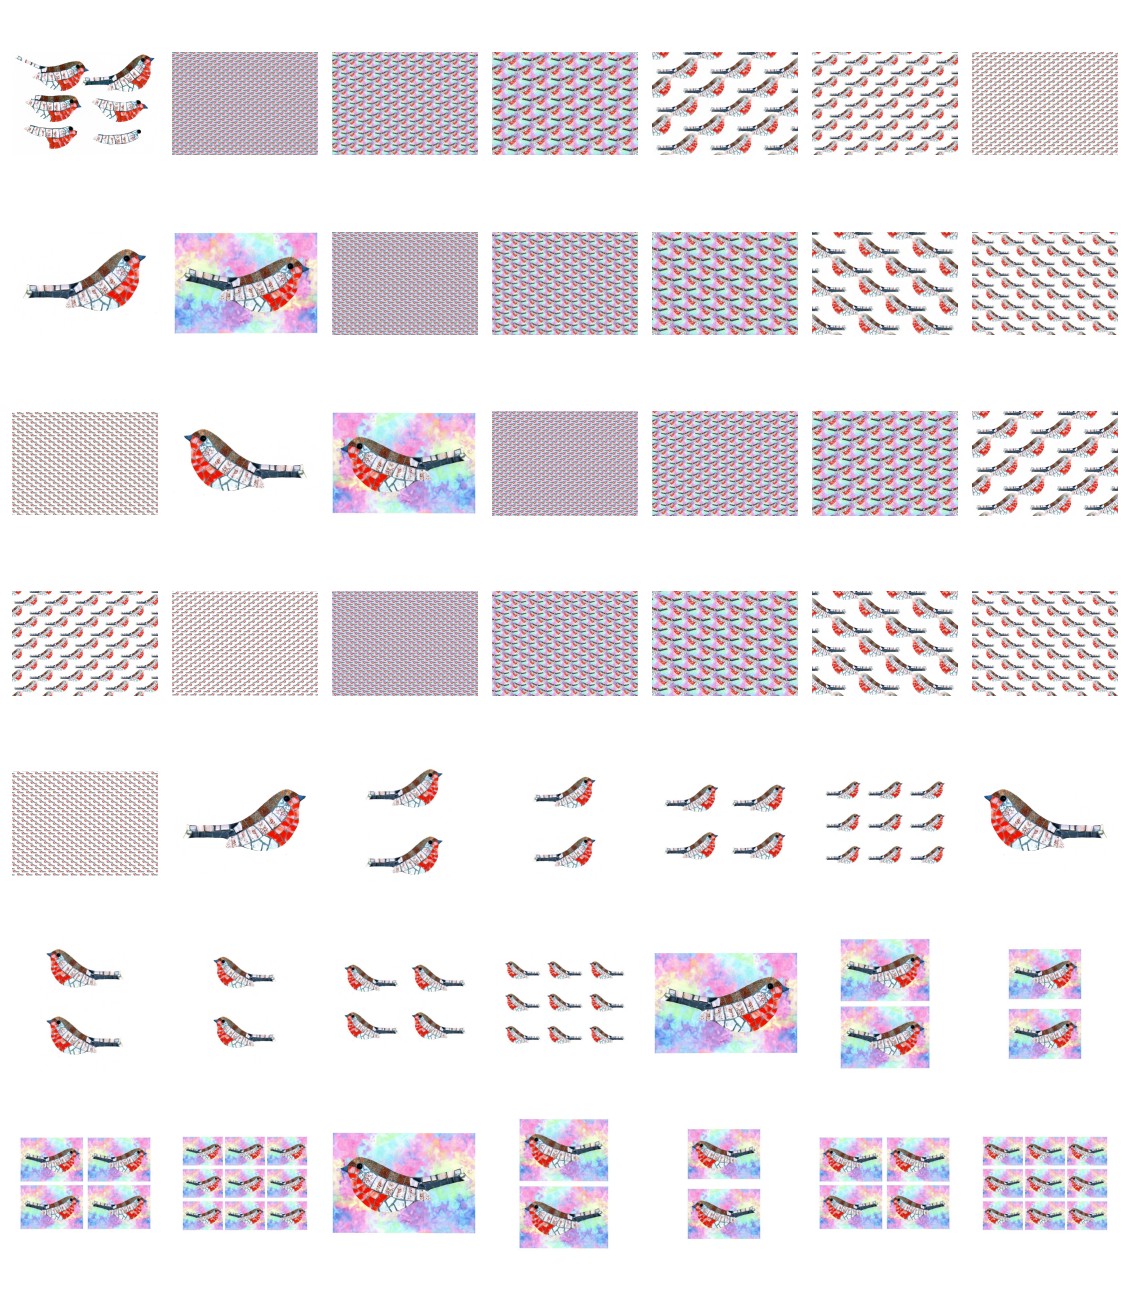 Tiled Effect Birds - Set 06 - 48 Pages to Download